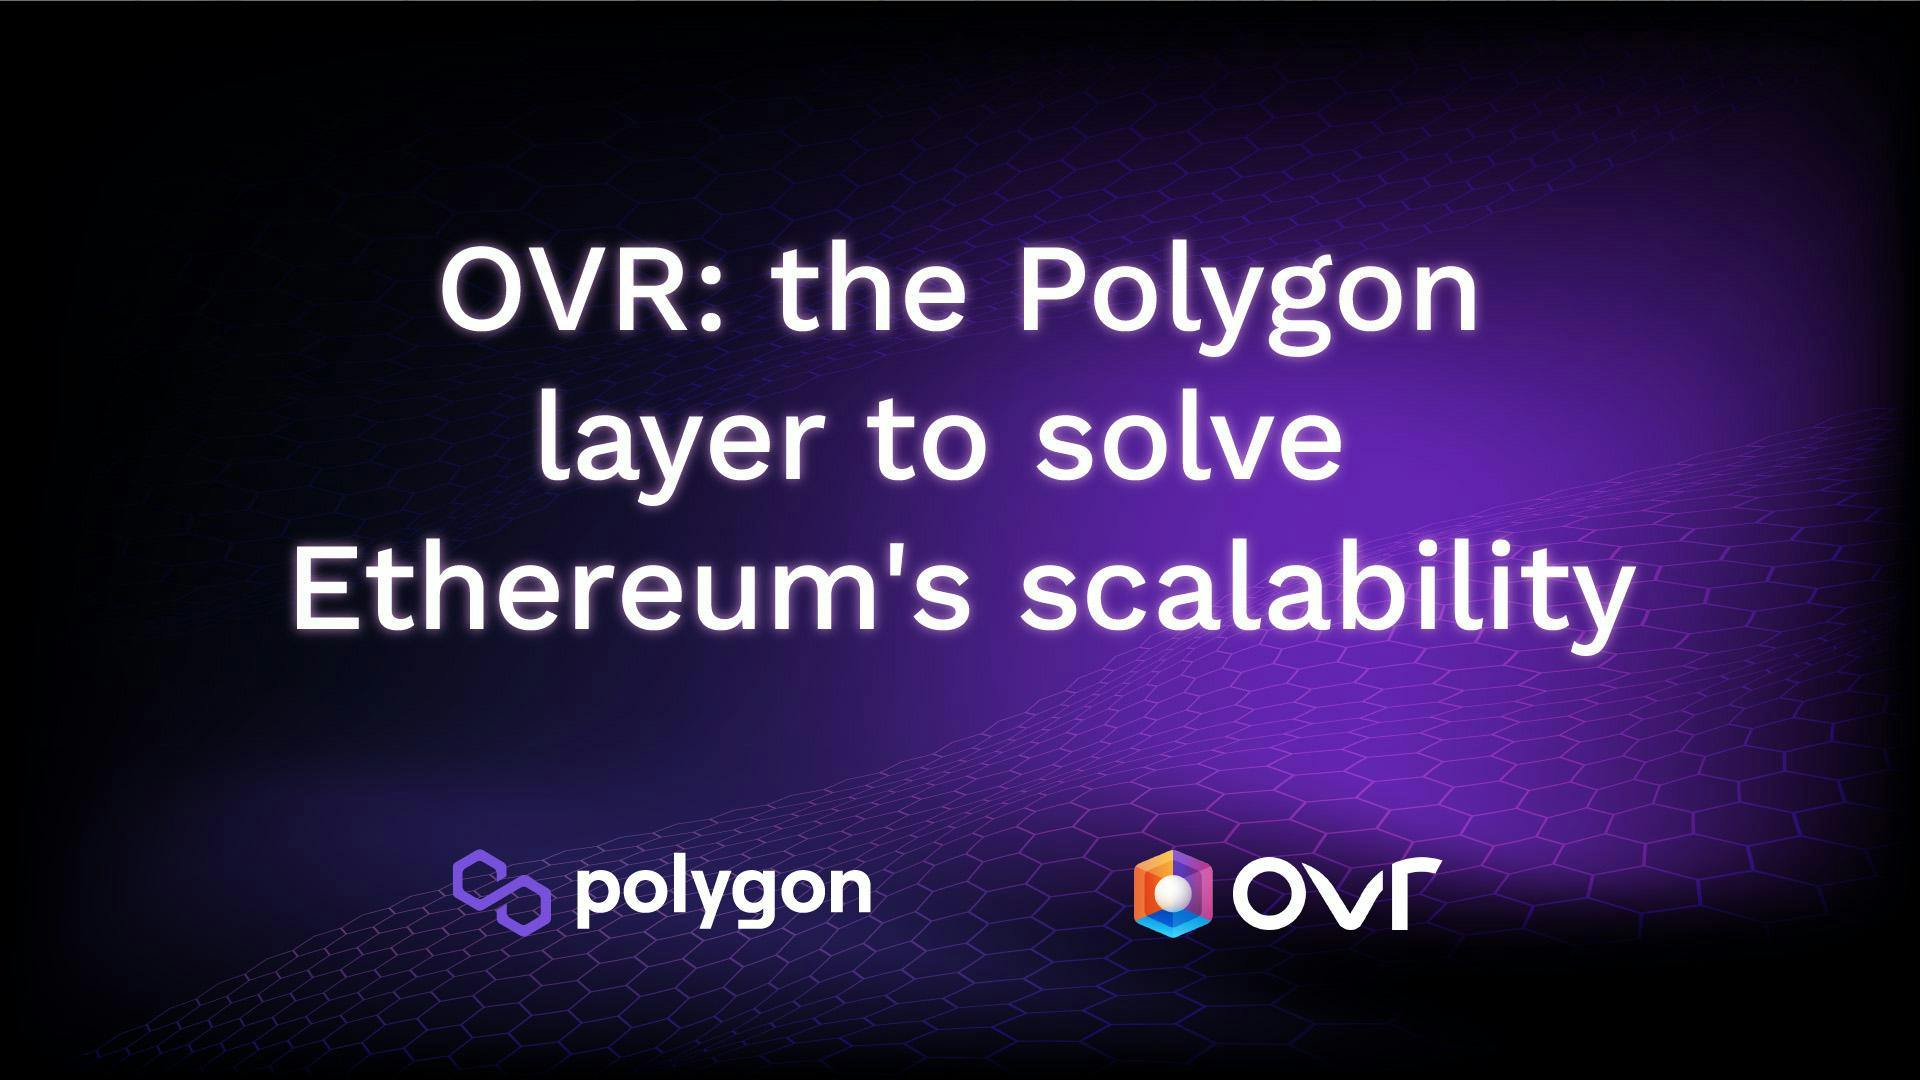 OVR to Use Polygon Layer to Solve Scalability Issue of Ethereum